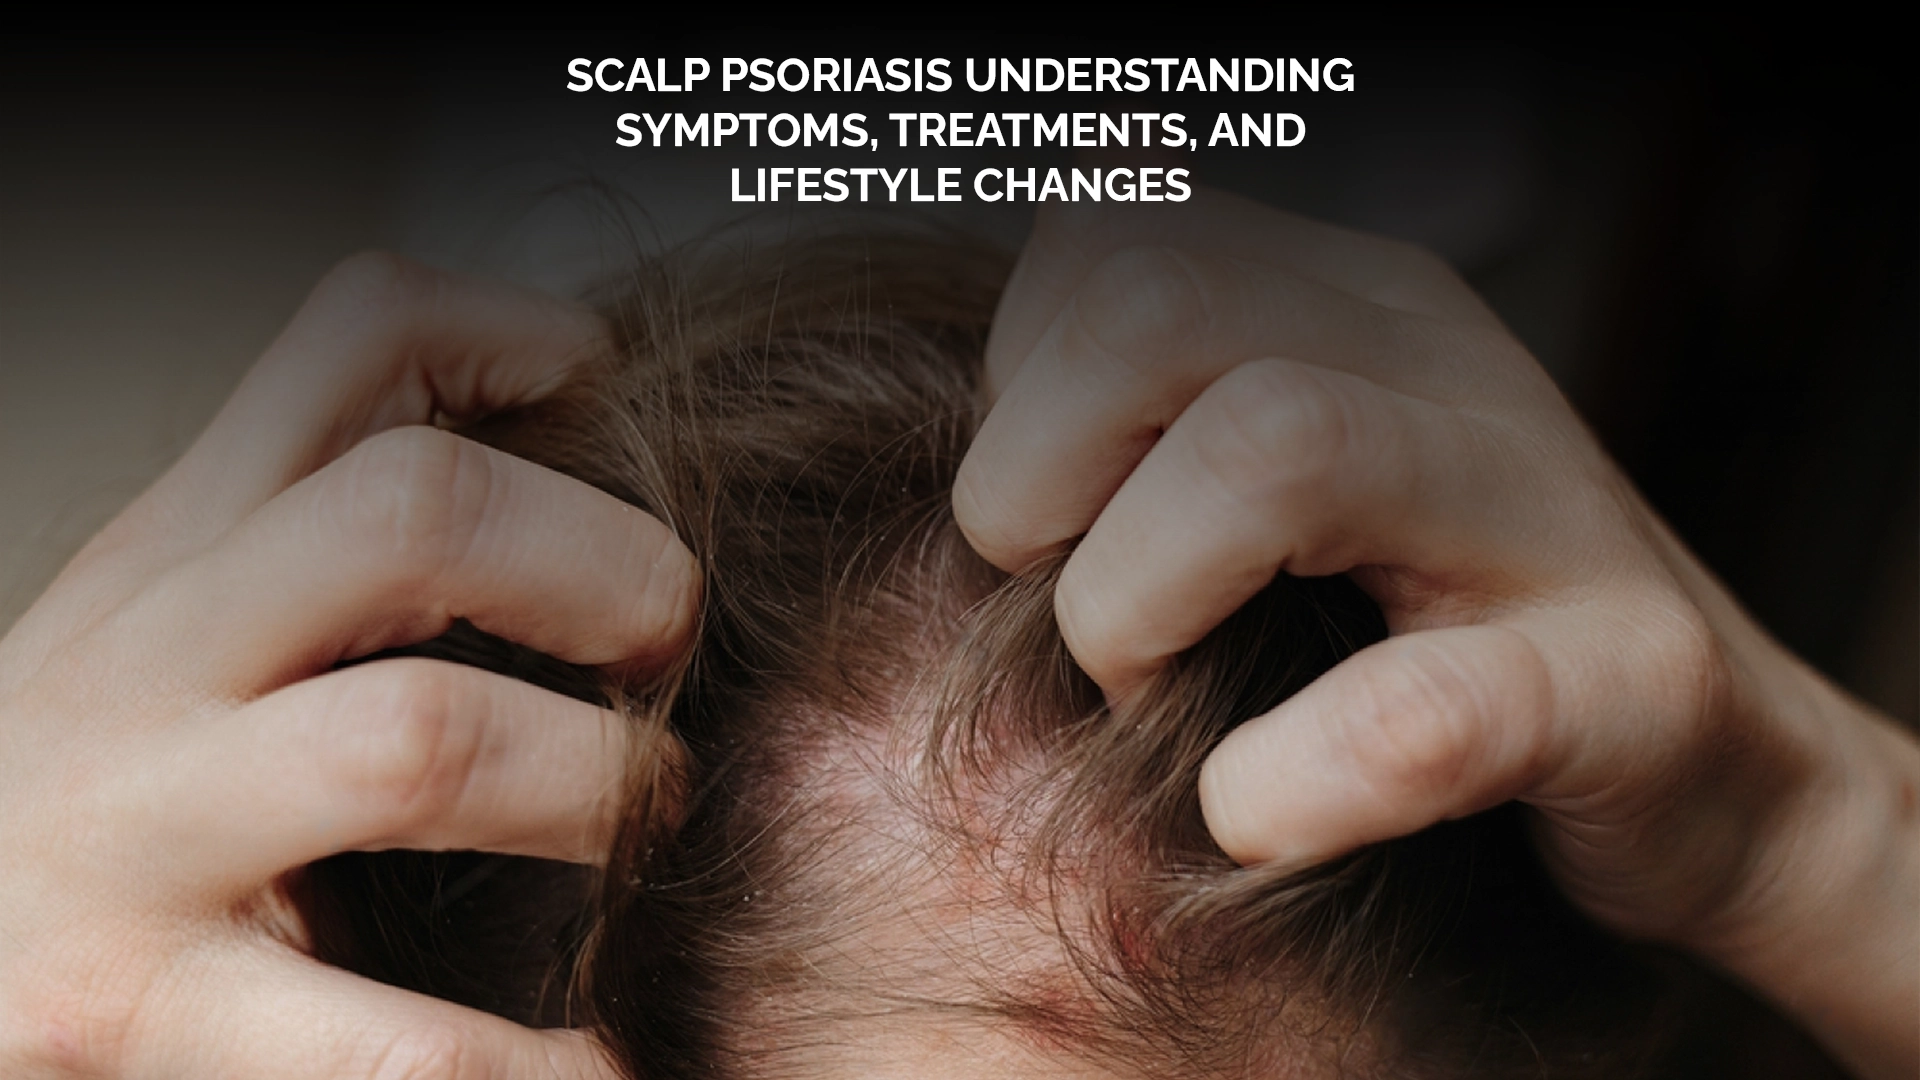 Scalp Psoriasis Understanding Symptoms, Treatments, and Lifestyle Changes